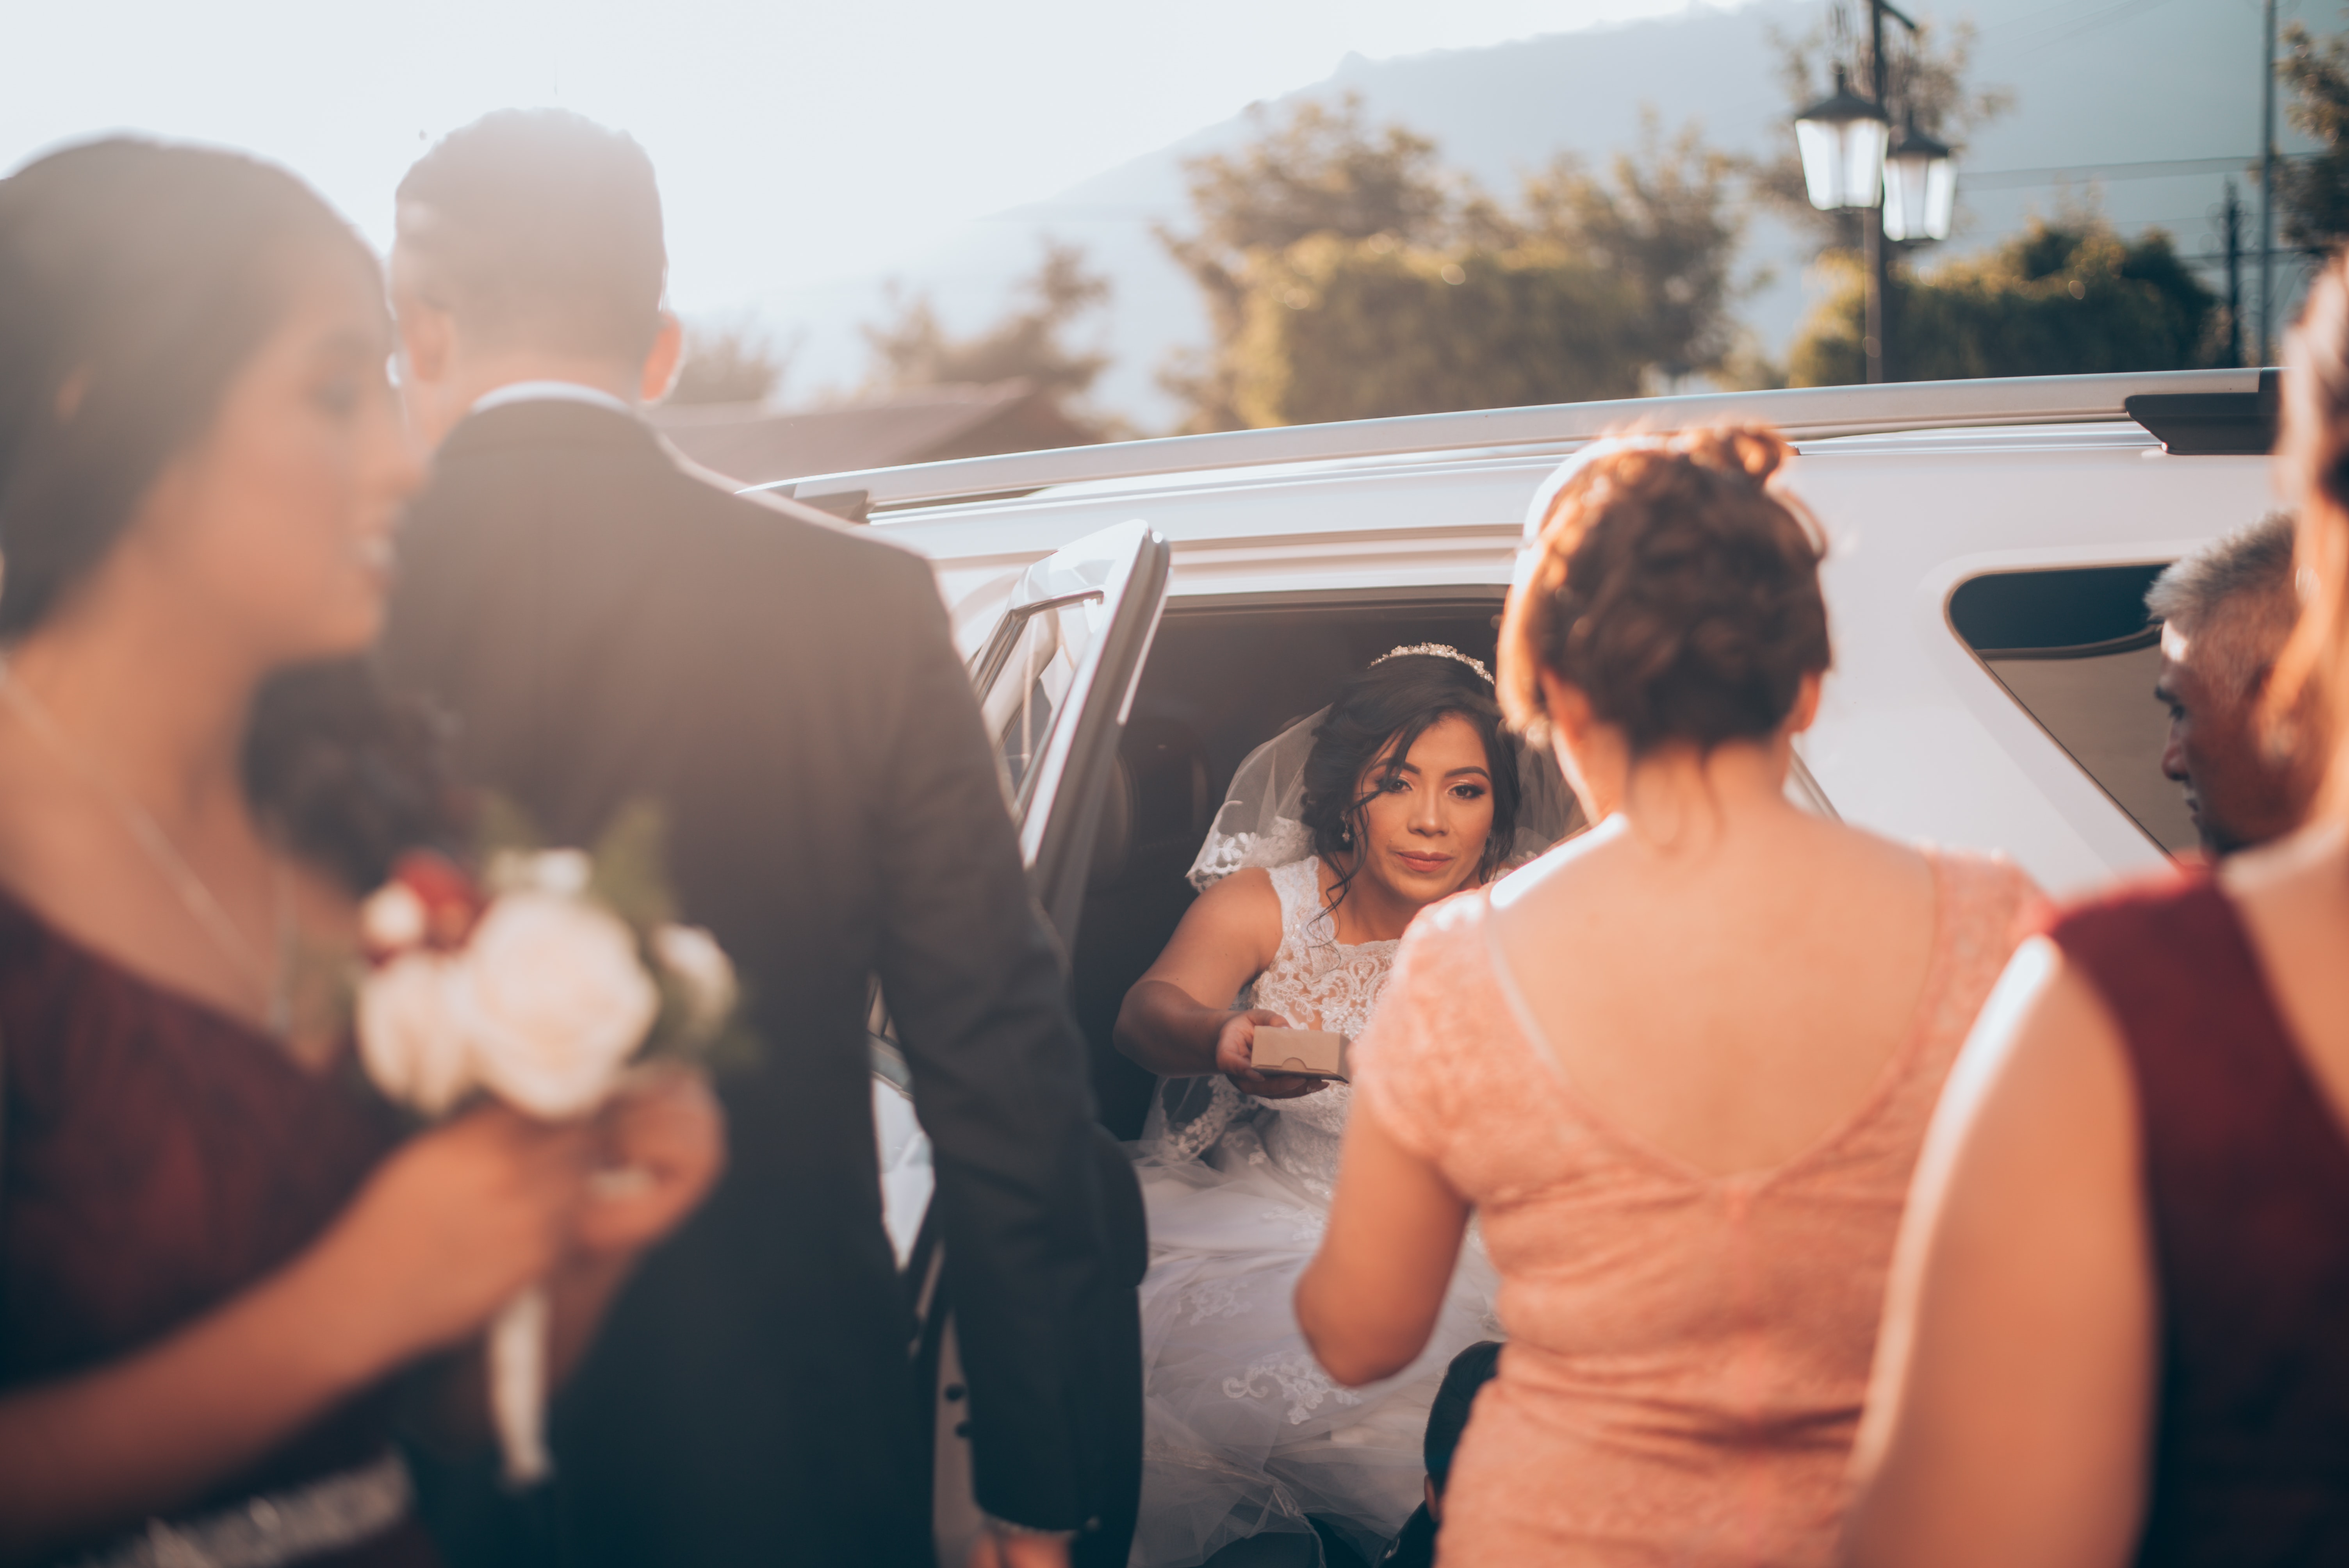 Akron Limousine Service in a wedding